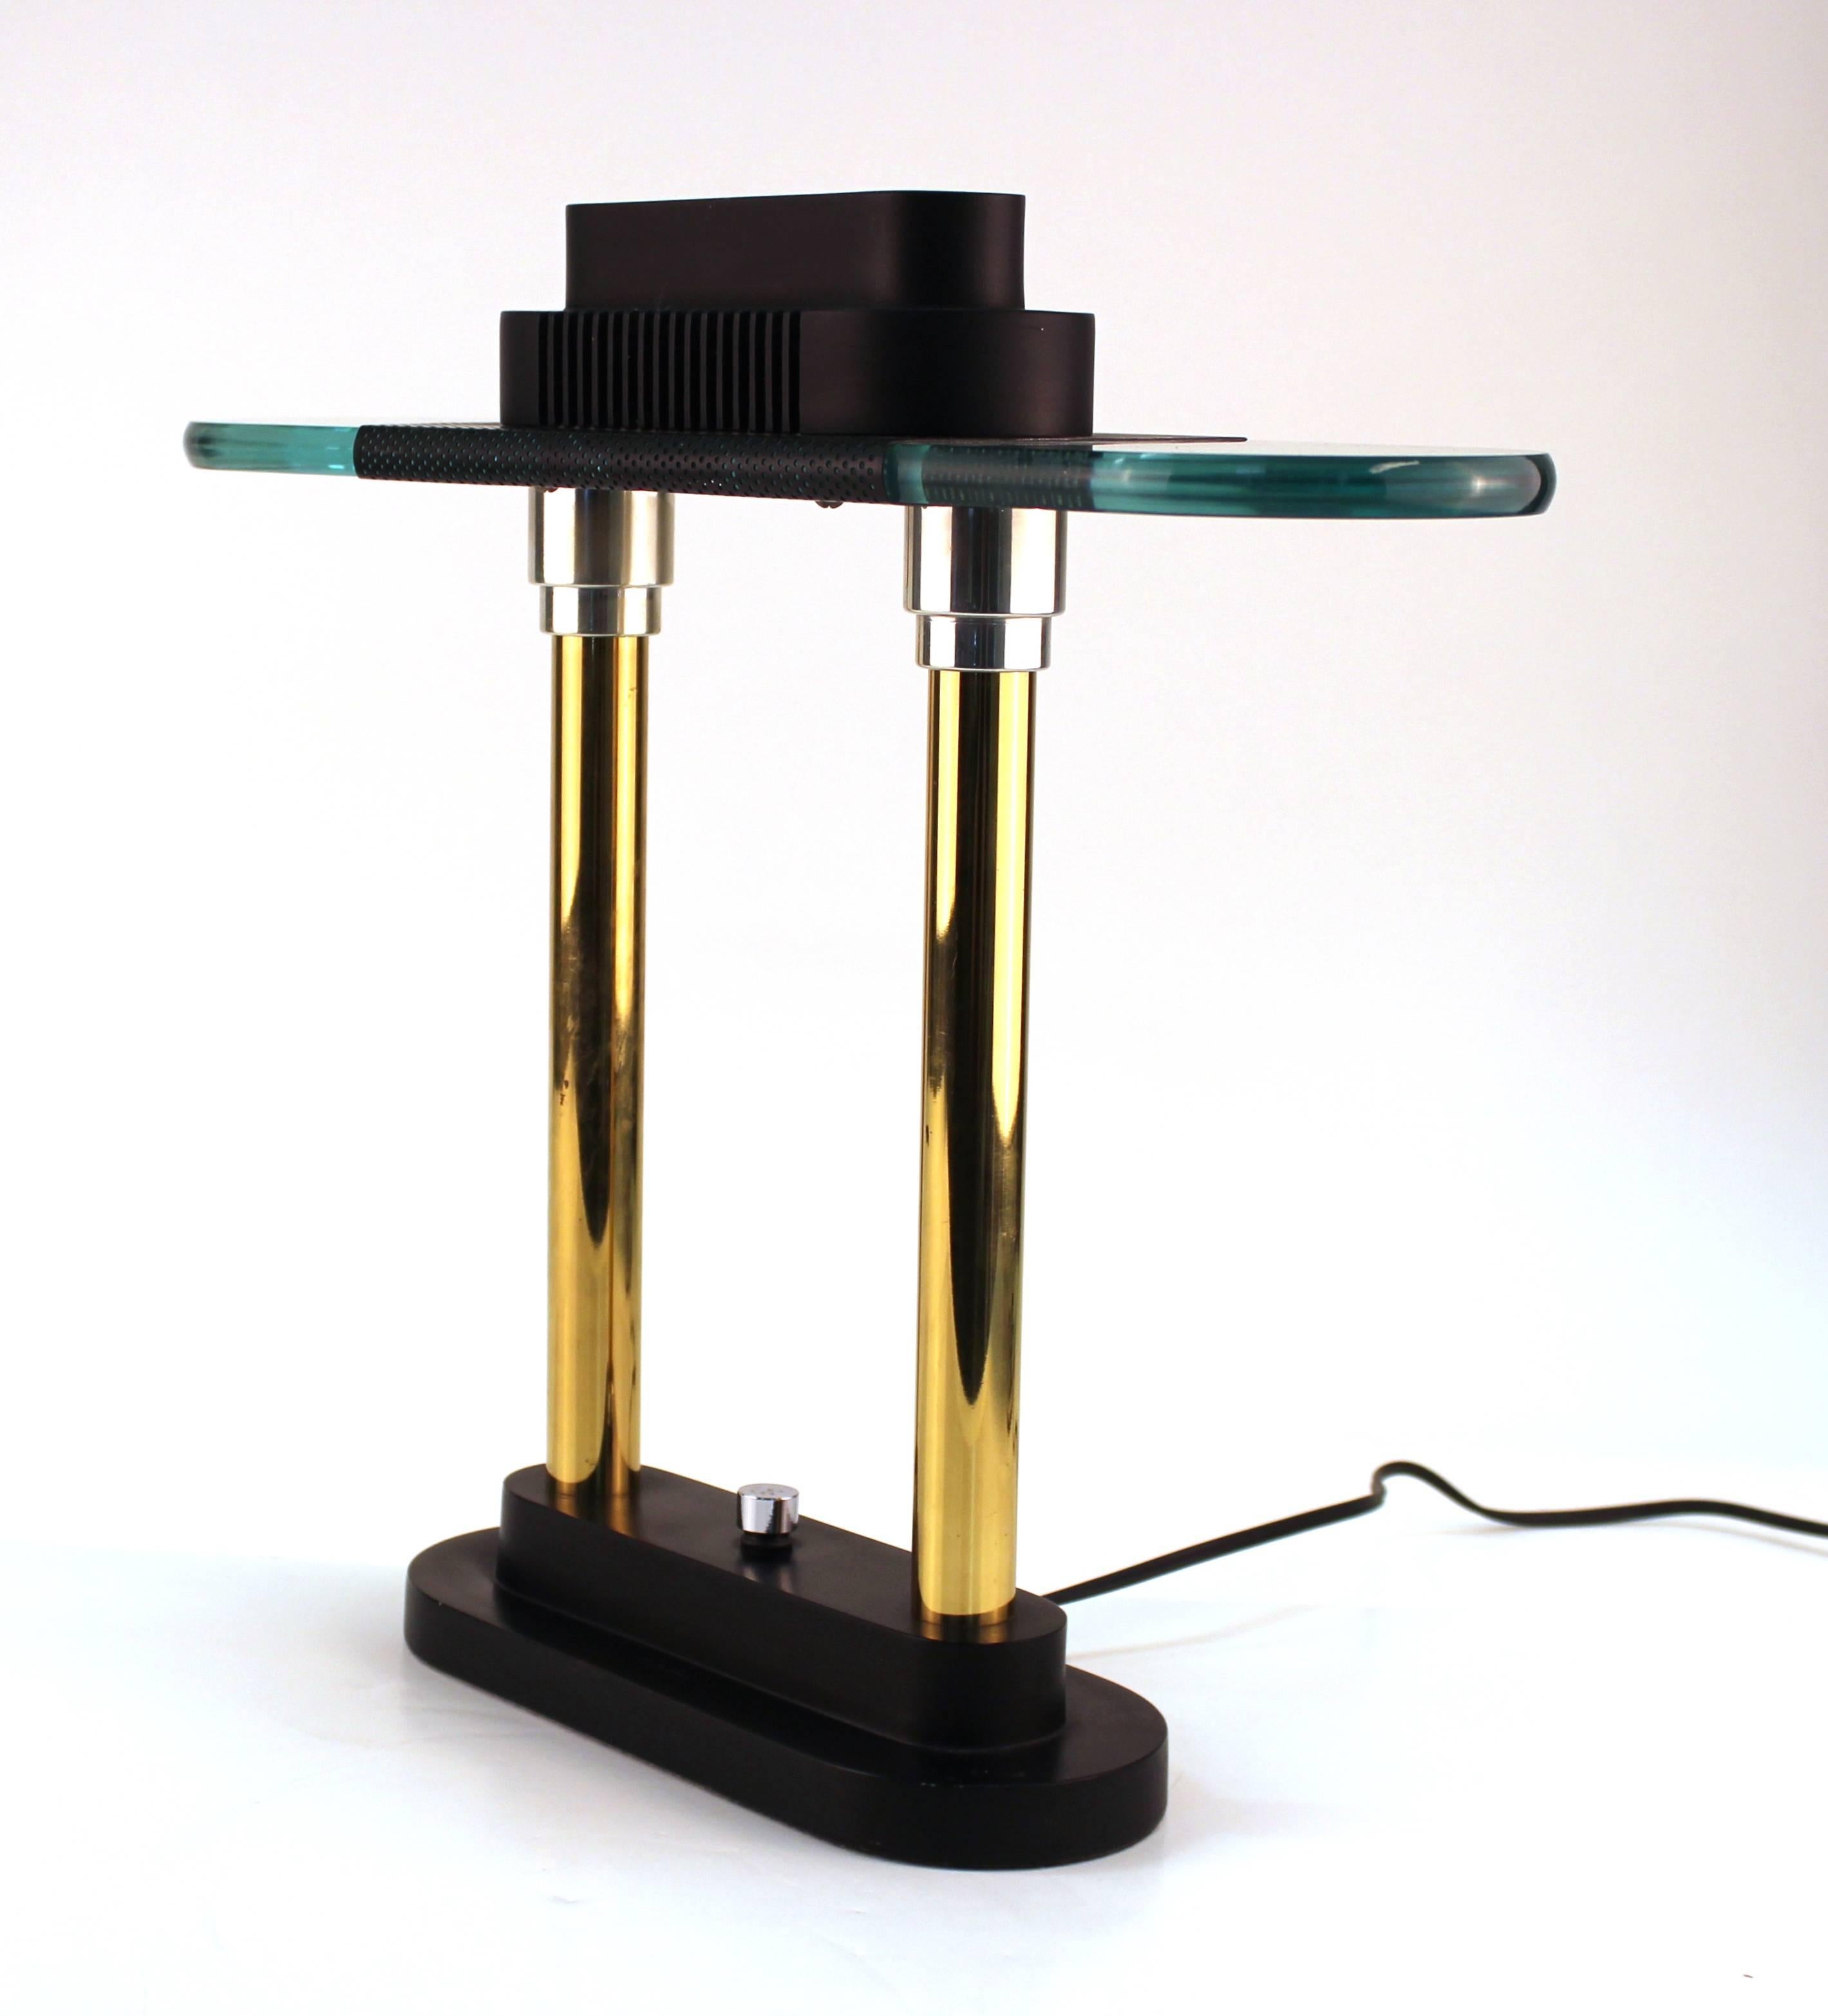 Robert Sonneman for George Kovacs table or desk lamp dating from the 1980s. Crafted with stepped top and base in black lacquered metal connected by a pair of brass pillars with chrome accents. Features also include a pair of glass 'wings' with